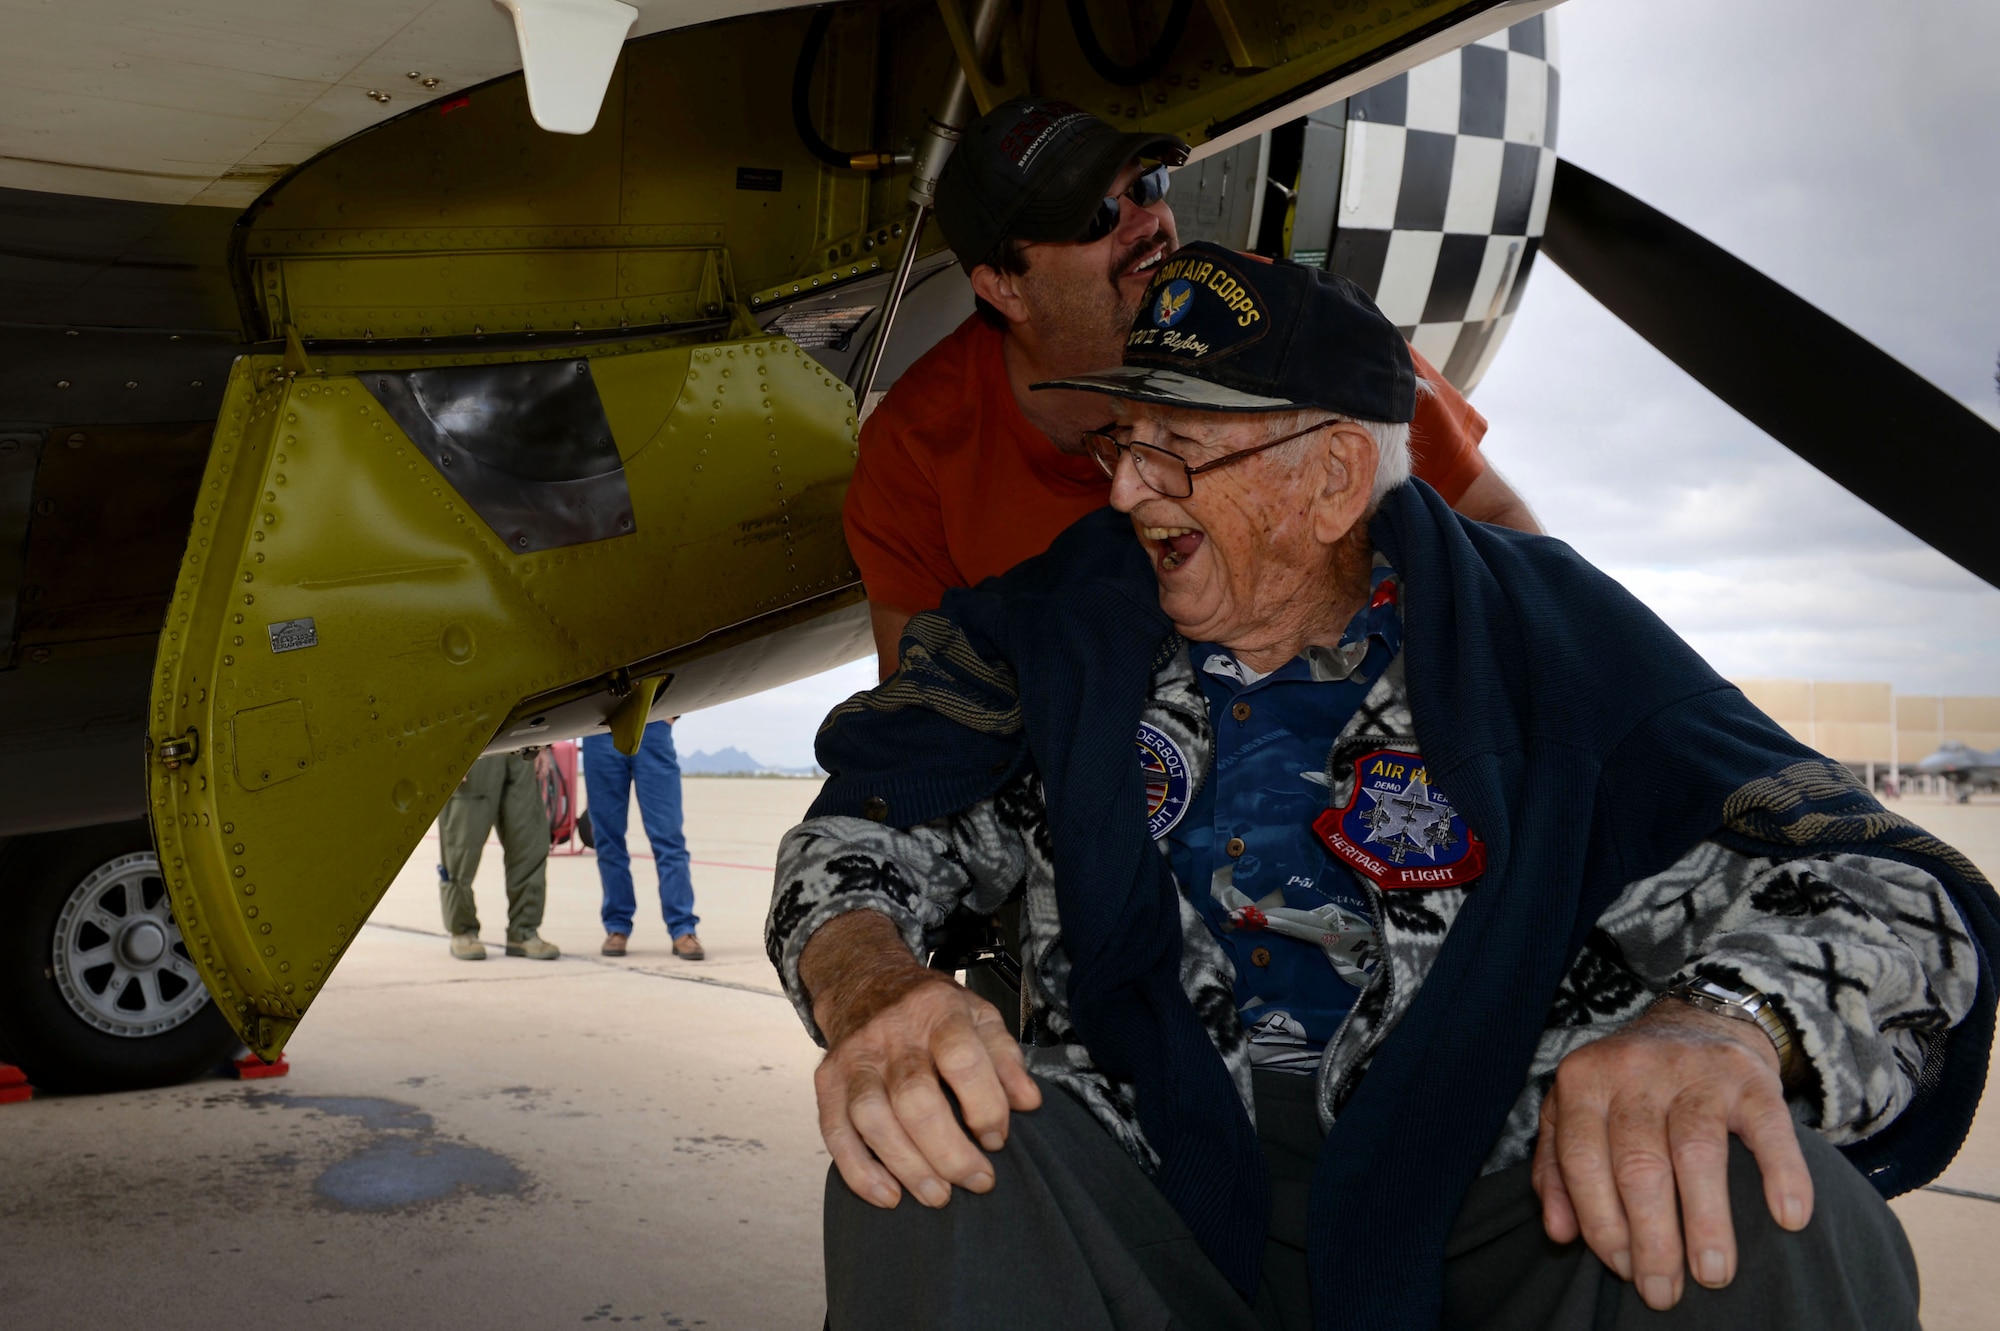 Retired Air National Guard Chief Warrant Officer 2 Robert Hertel, laughs while under the wing of a P-47 Thunderbolt during the Heritage Flight Training and Certification Course Feb. 28, 2015, at Davis-Monthan Air Force Base, Ariz. Hertel, a 92-year-old World War II veteran, was given the opportunity to visit the aircraft he used to fly. (U.S. Air Force photo/Senior Airman Jensen Stidham)